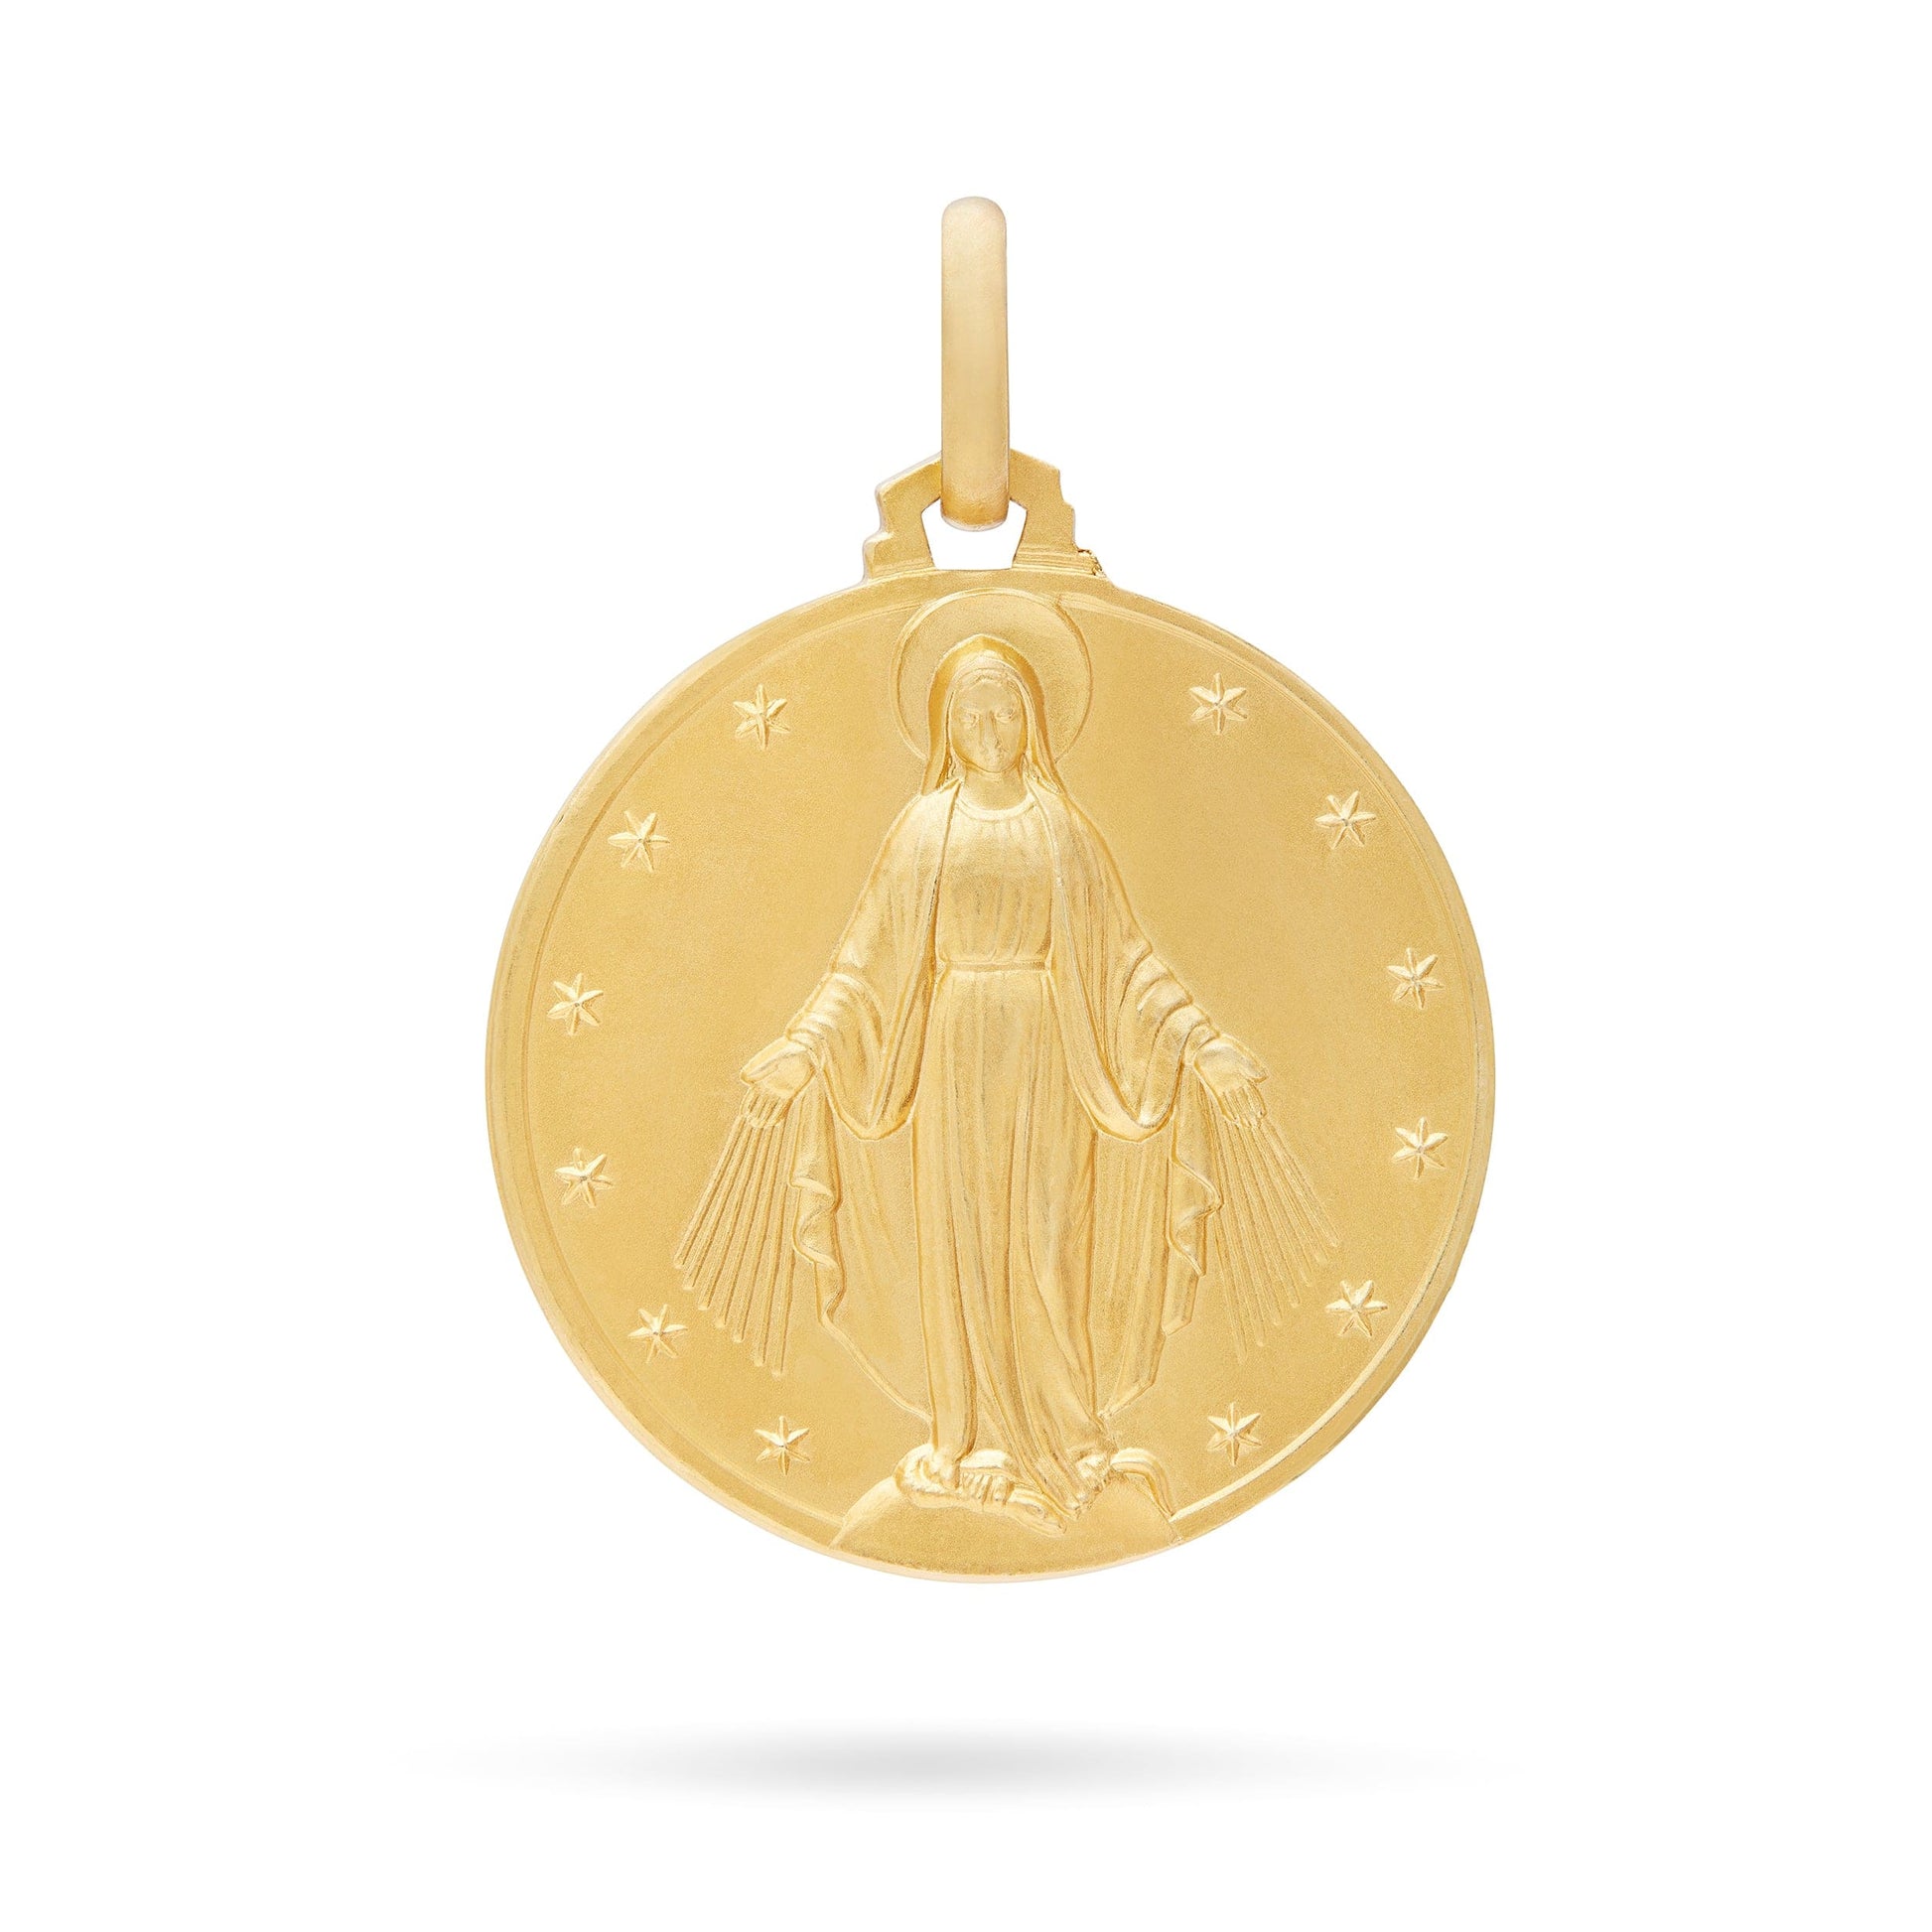 MONDO CATTOLICO Jewelry Our Lady of the Miraculous Medal gold Medal